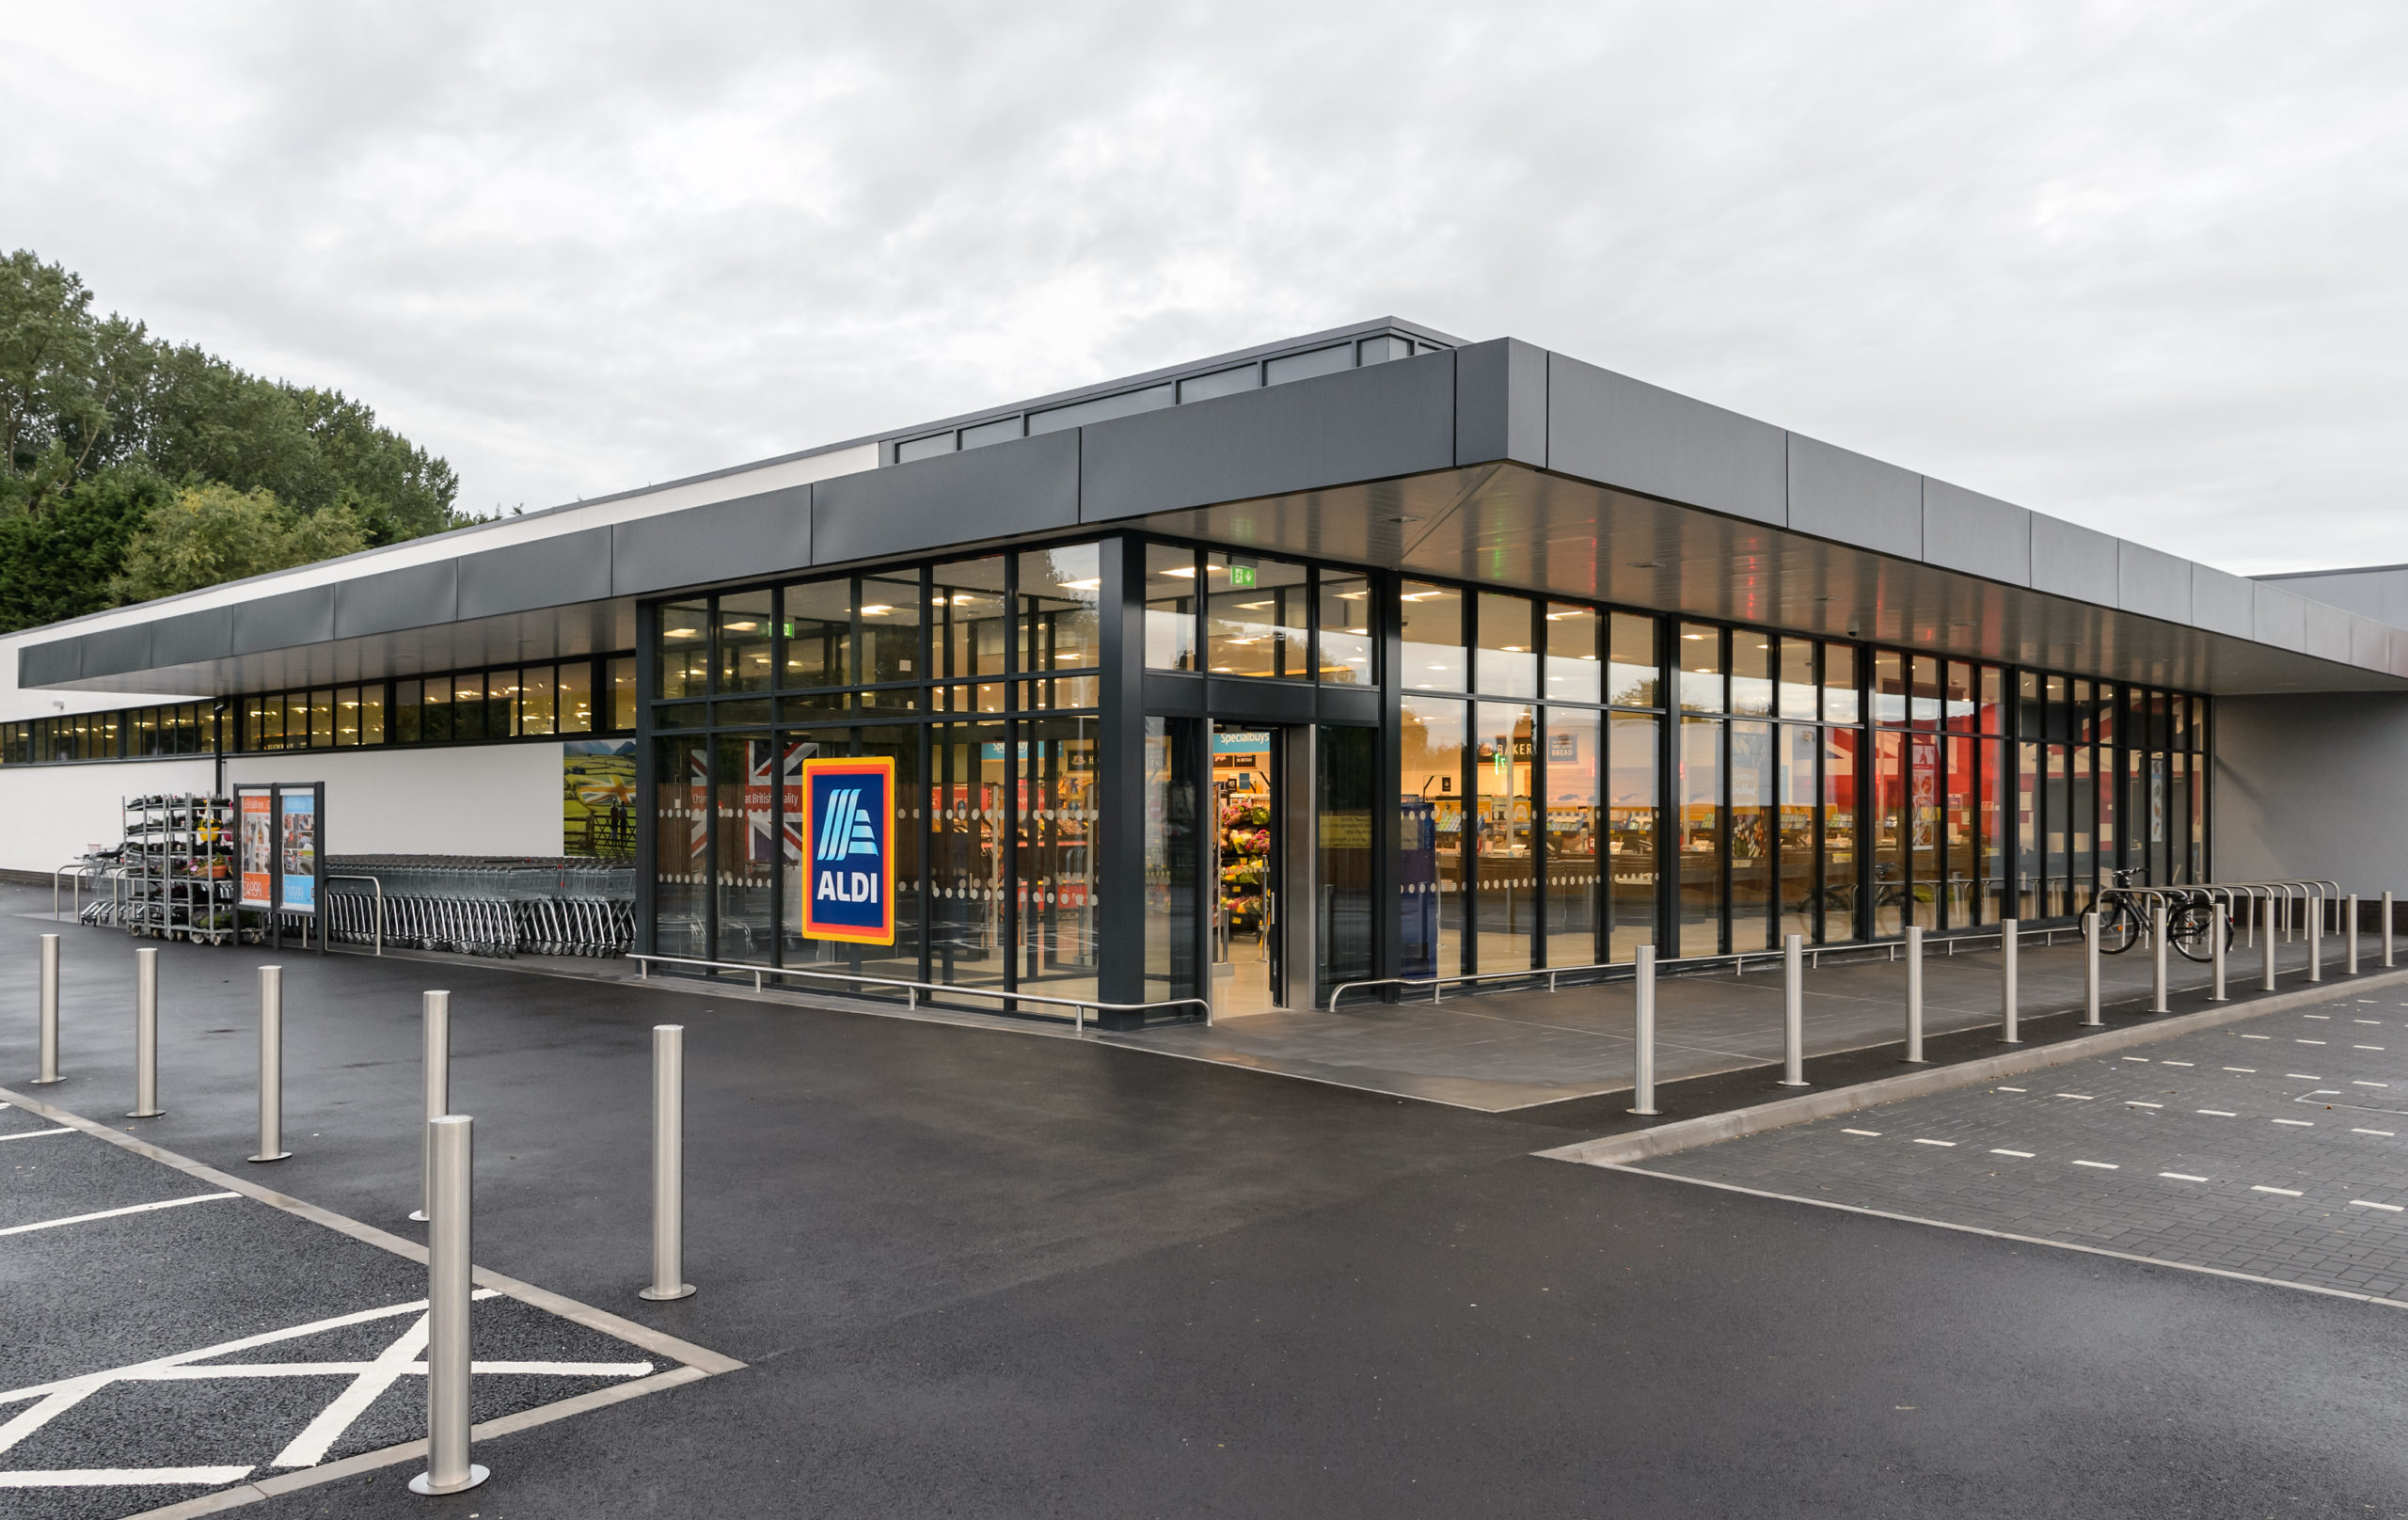 ALDI REVEALS AUGUST BANK HOLIDAY OPENING HOURS ALDI UK Press Office